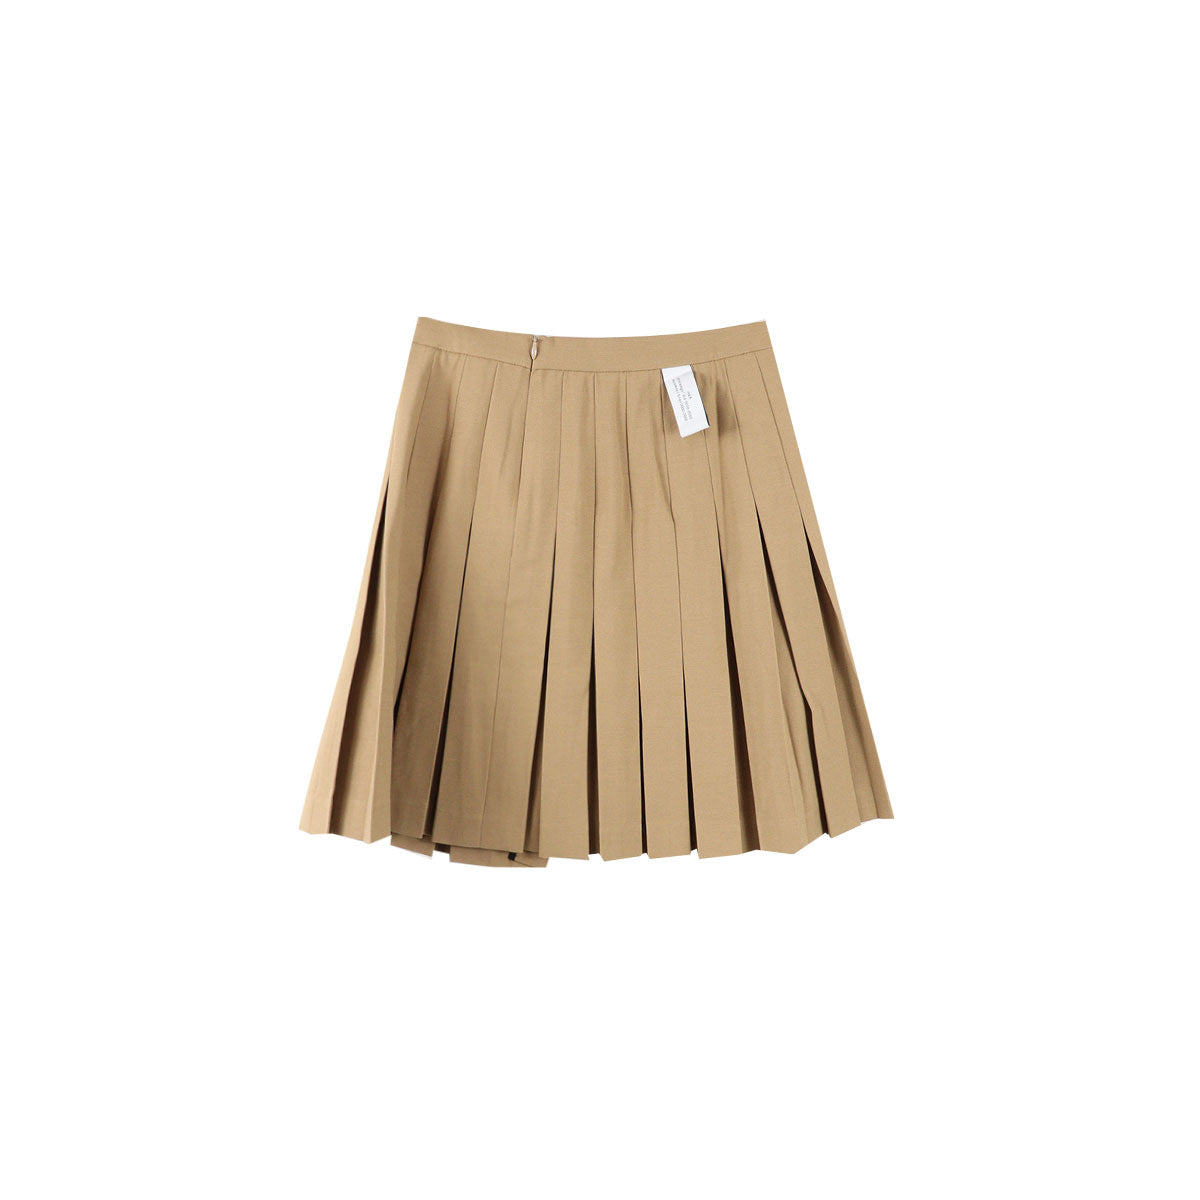 BOX PLEAT MINI SKIRT W/ BELT STRAPS - Why are you here?